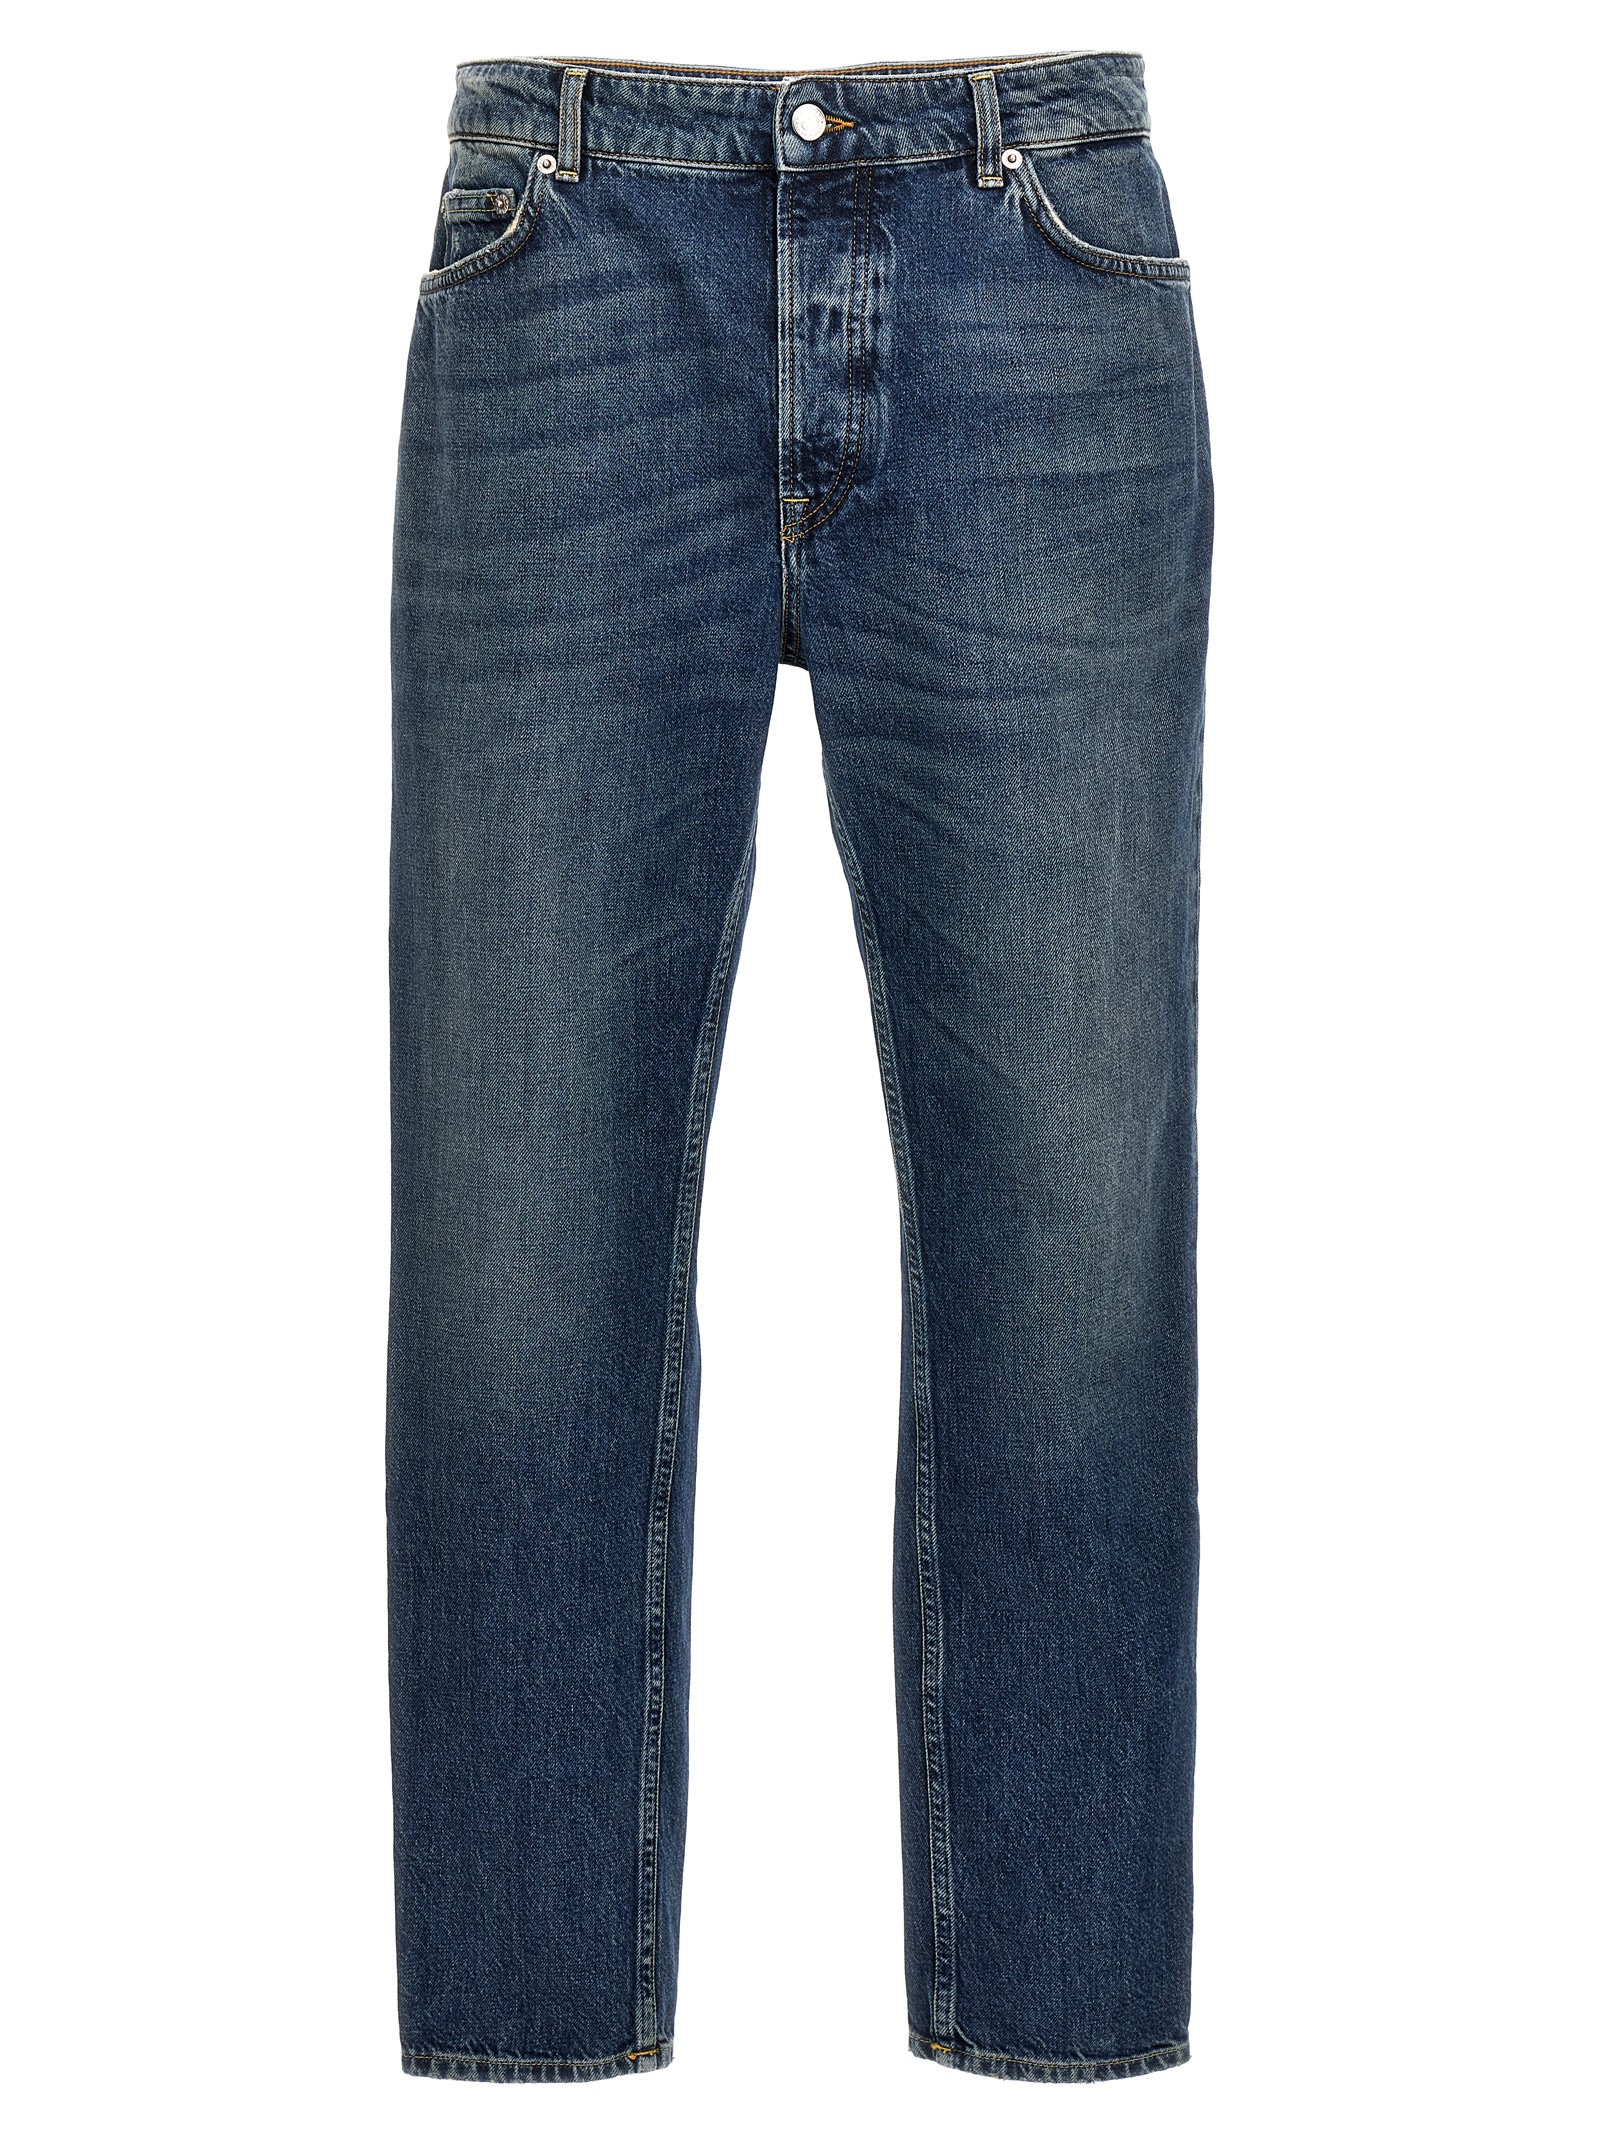 Shop Department Five Drake Jeans In Blue